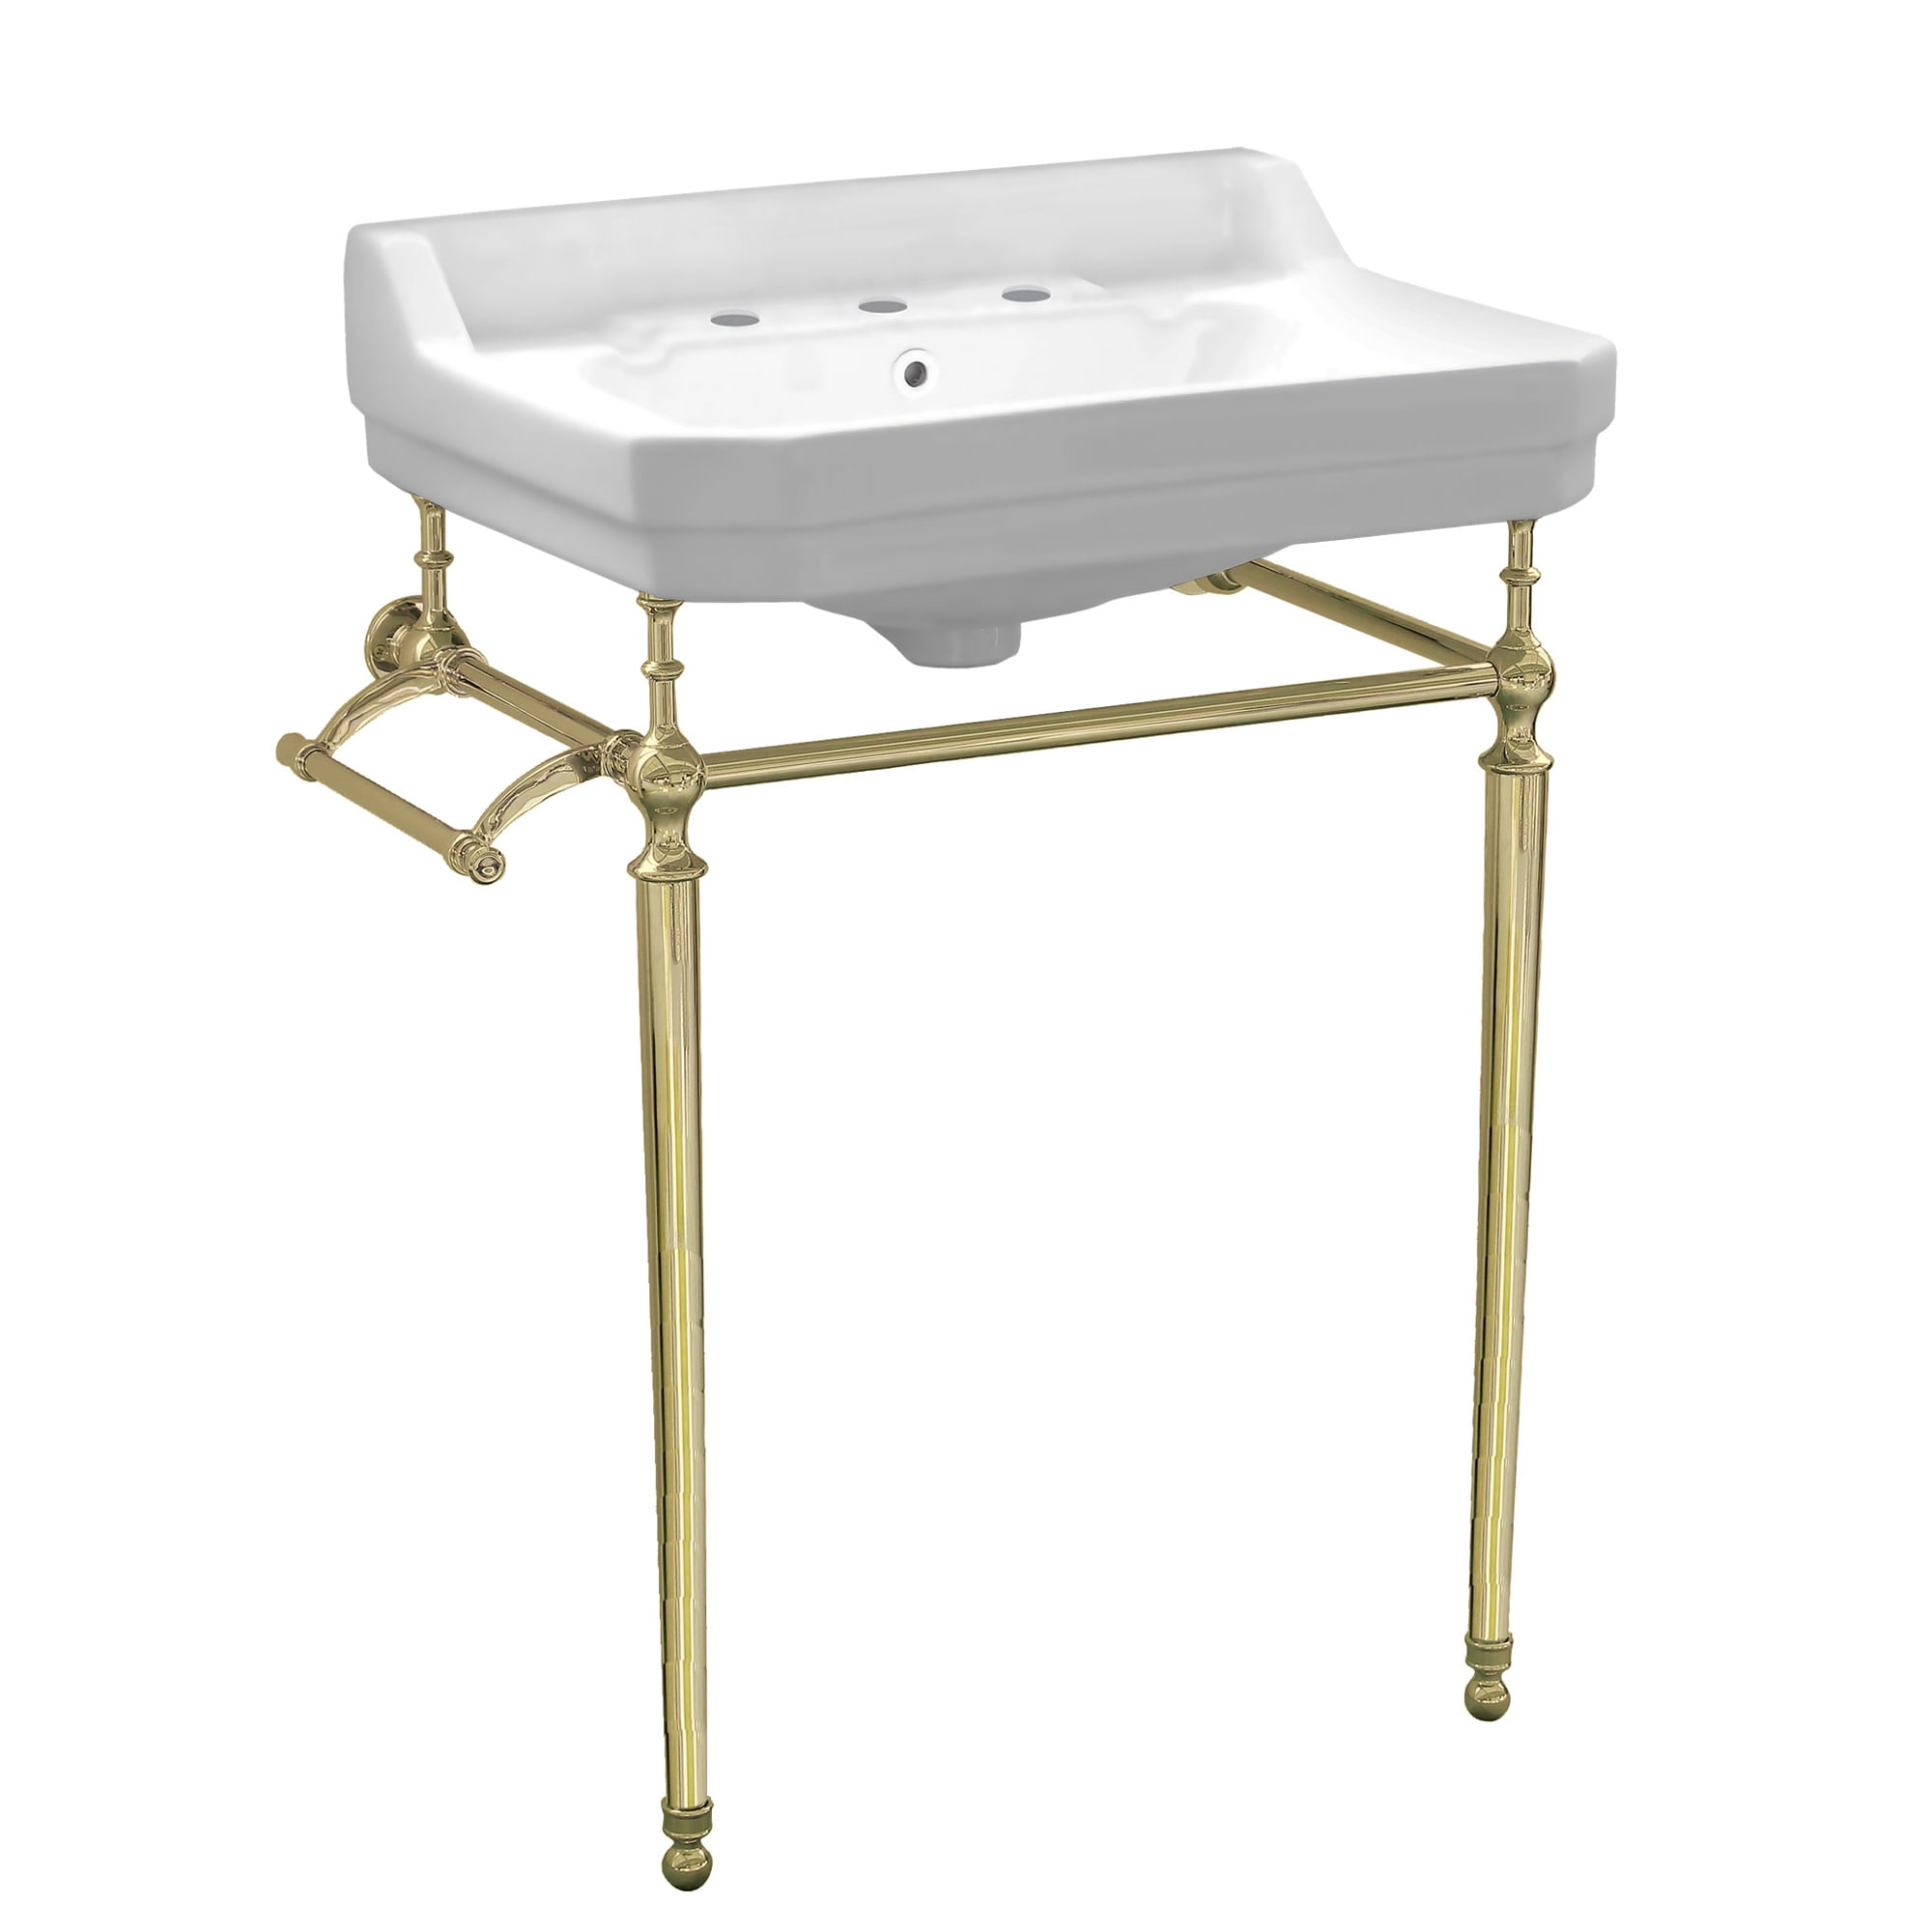 Whv024-l33-3h-b Victoriahaus Console With Integrated Rectangular Bowl & Three-hole - Polished Brass